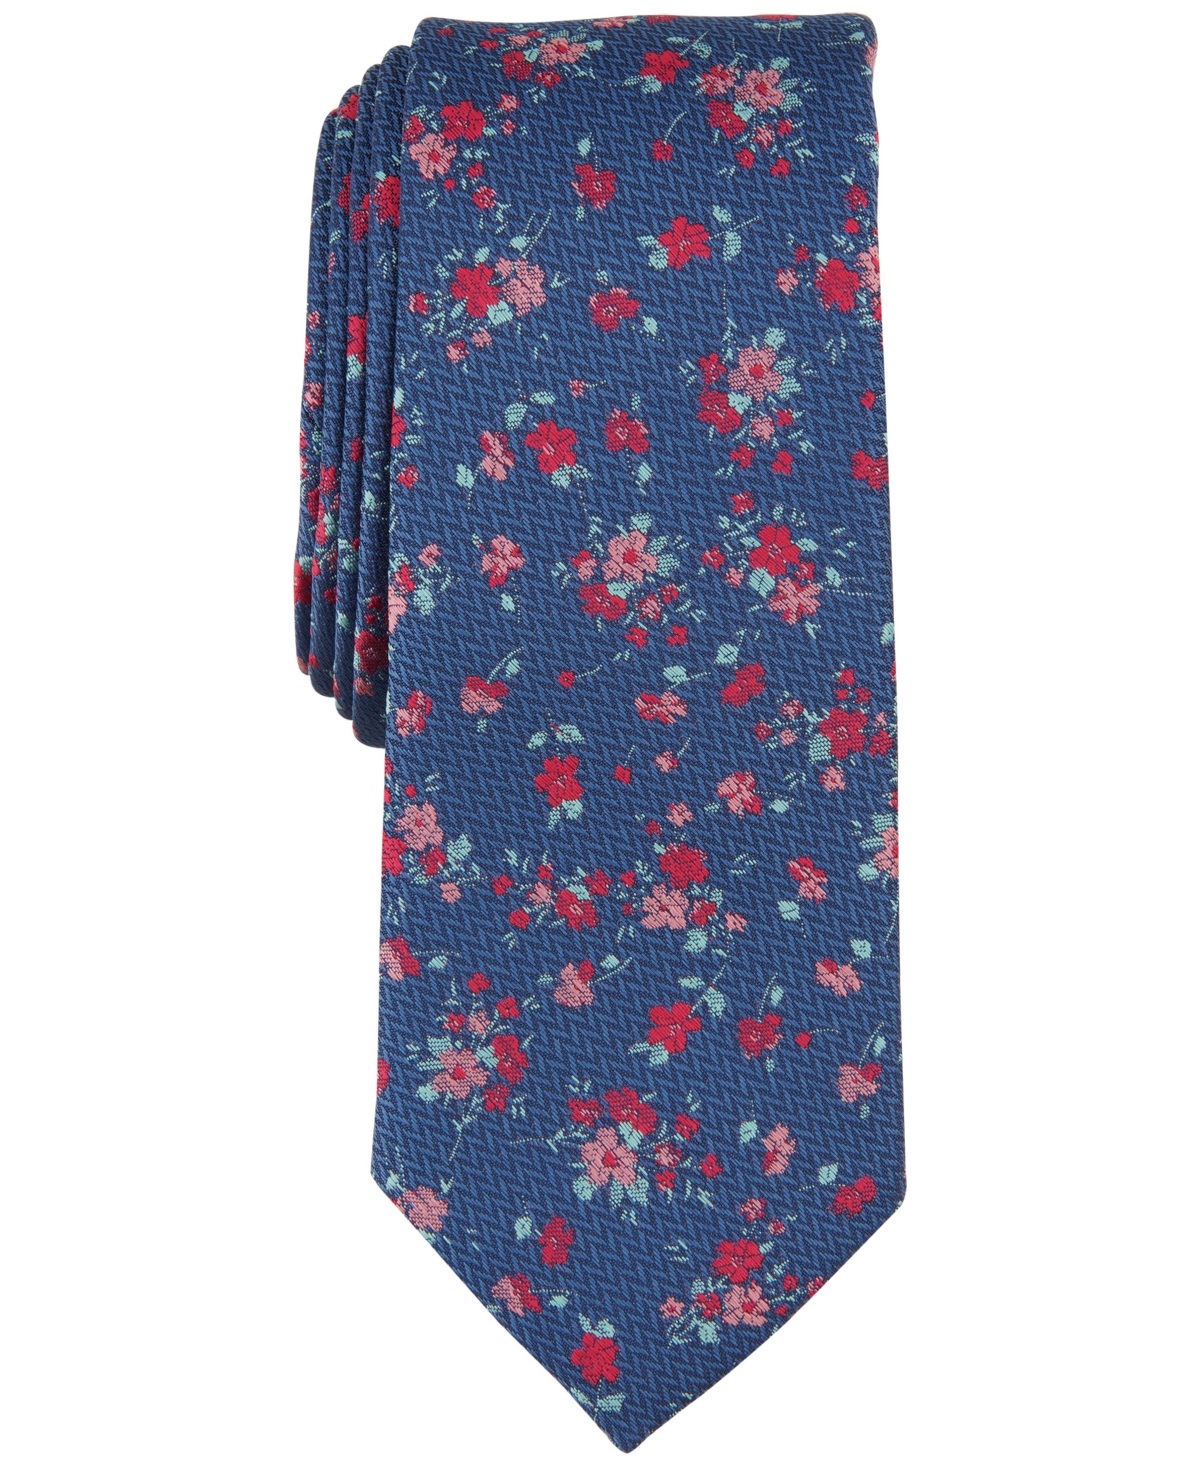 Men's Lance Floral Tie, Created for Macy's - Red